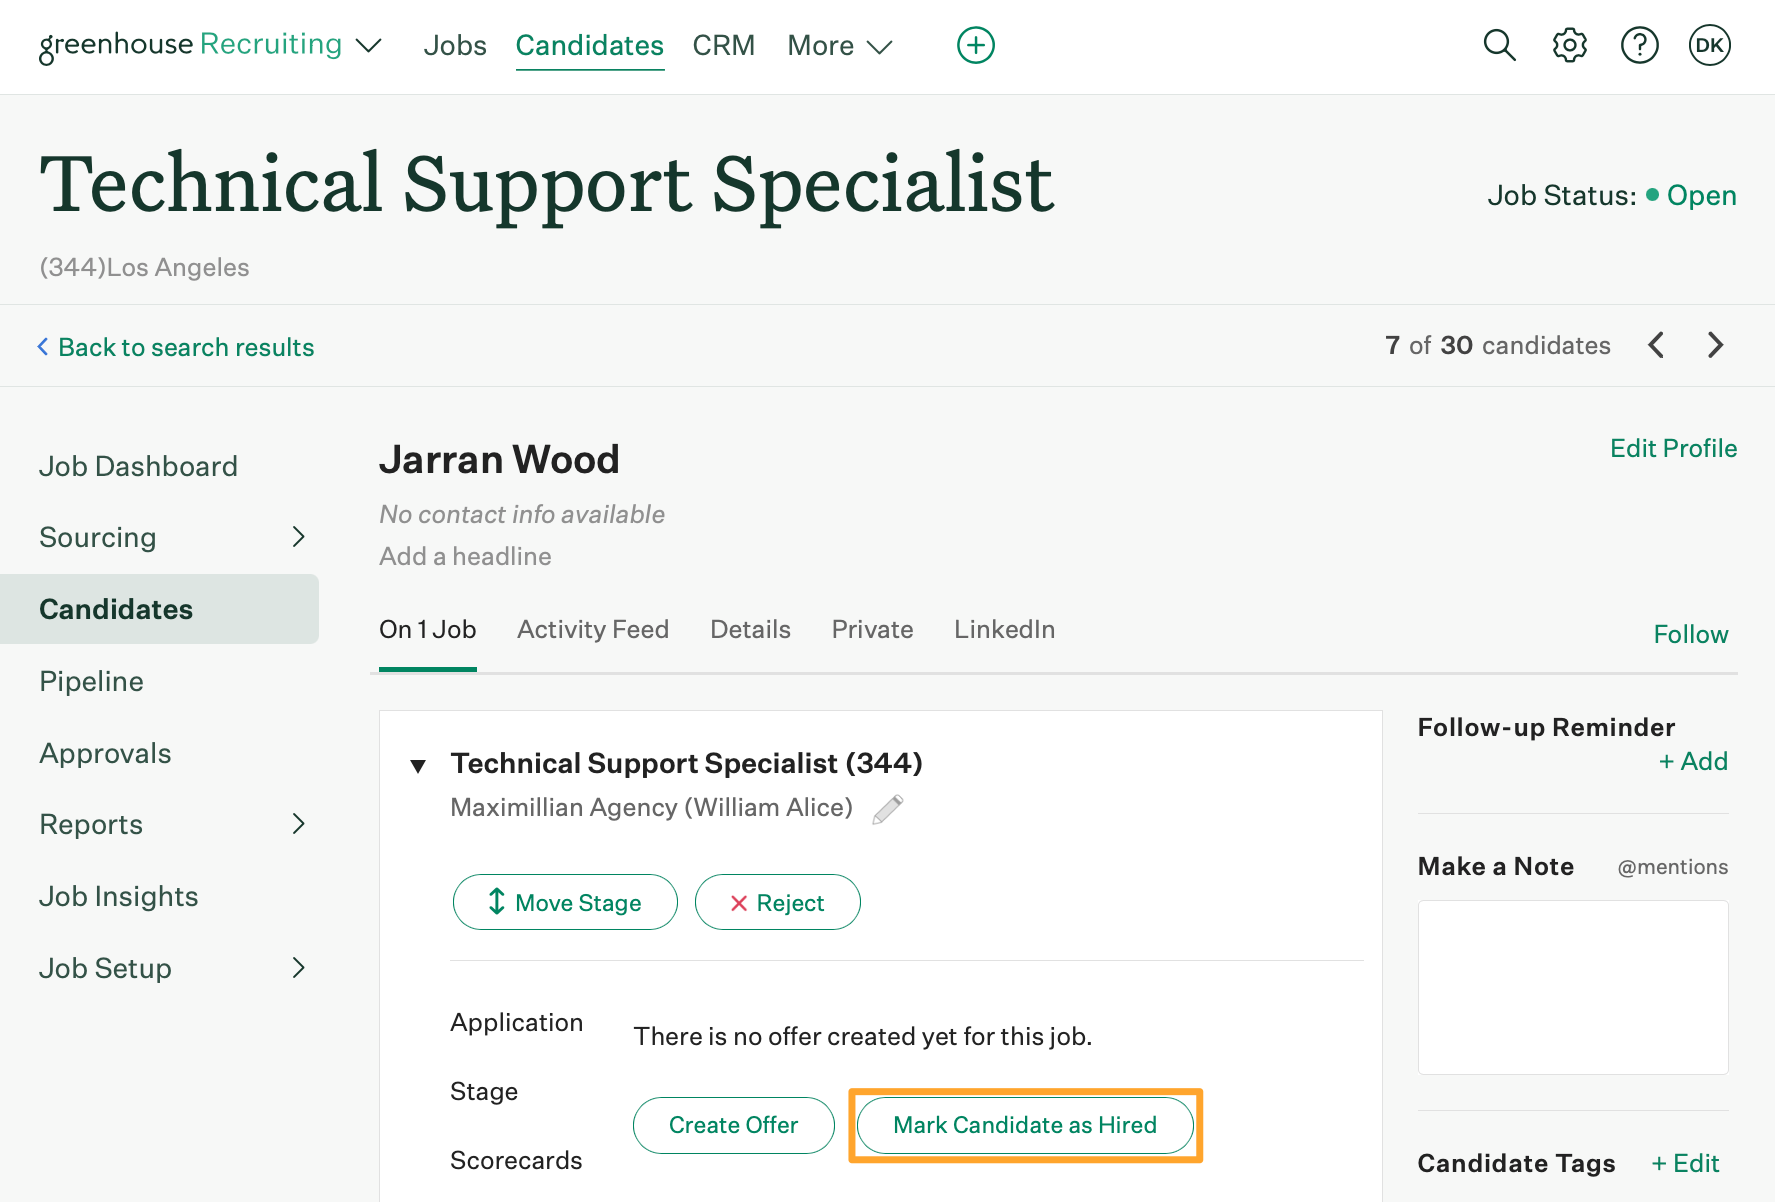 A candidate named Jarran Wood is shown on the Technical Support Specialist job with the Mark Candidate as Hired button highlighted in marigold